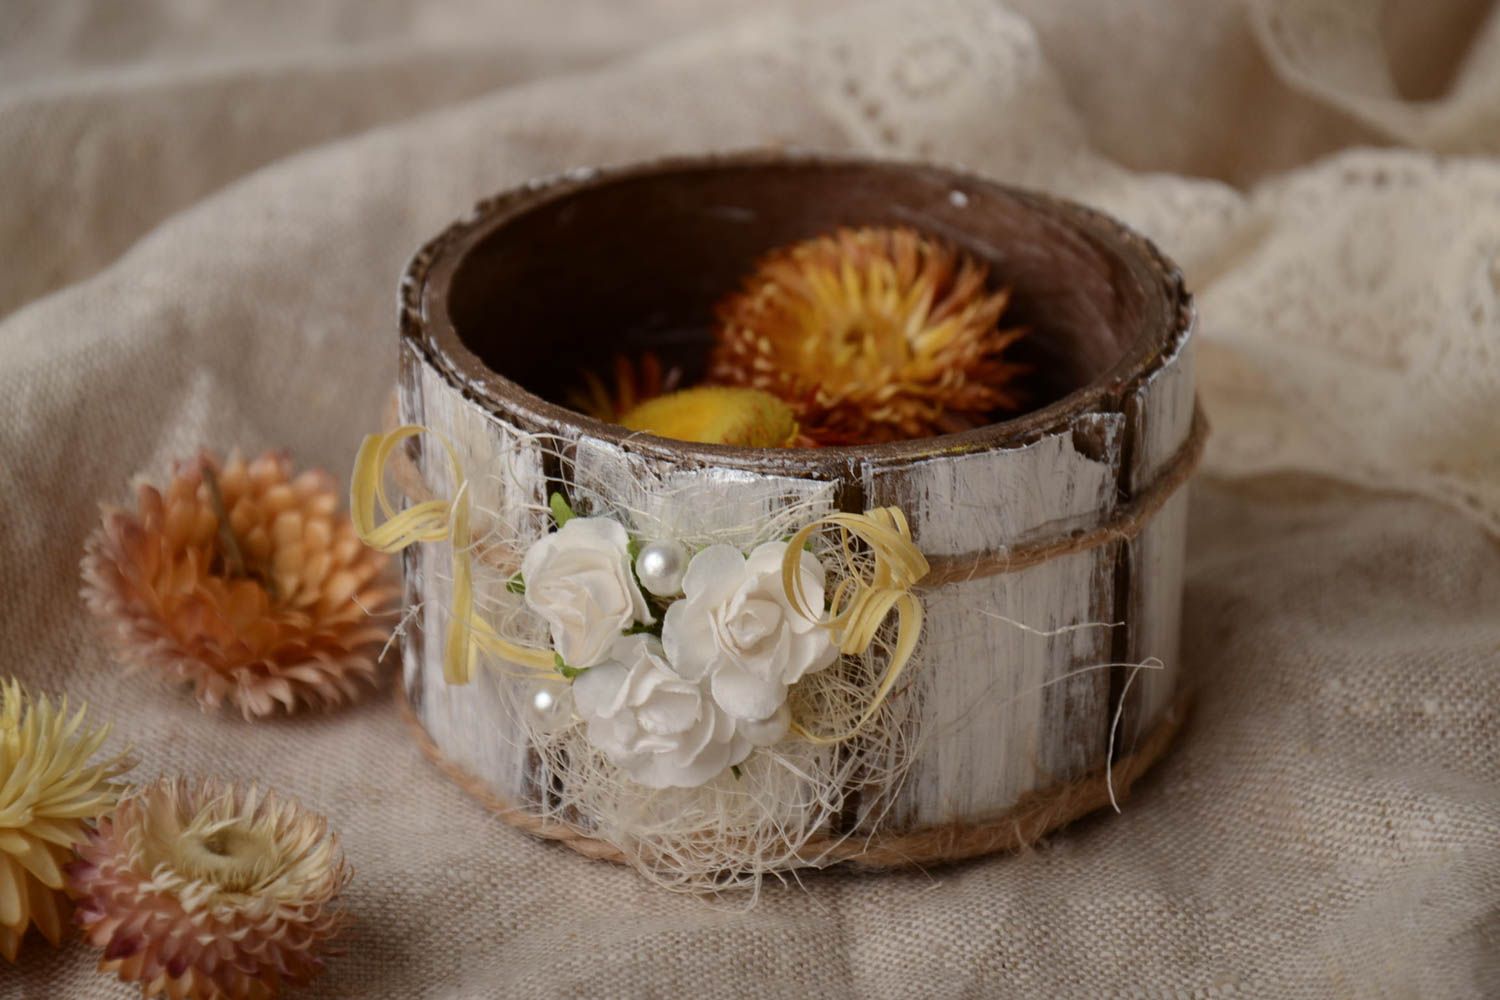 Handmade small carton decorative round jewelry box with flowers for little things photo 1